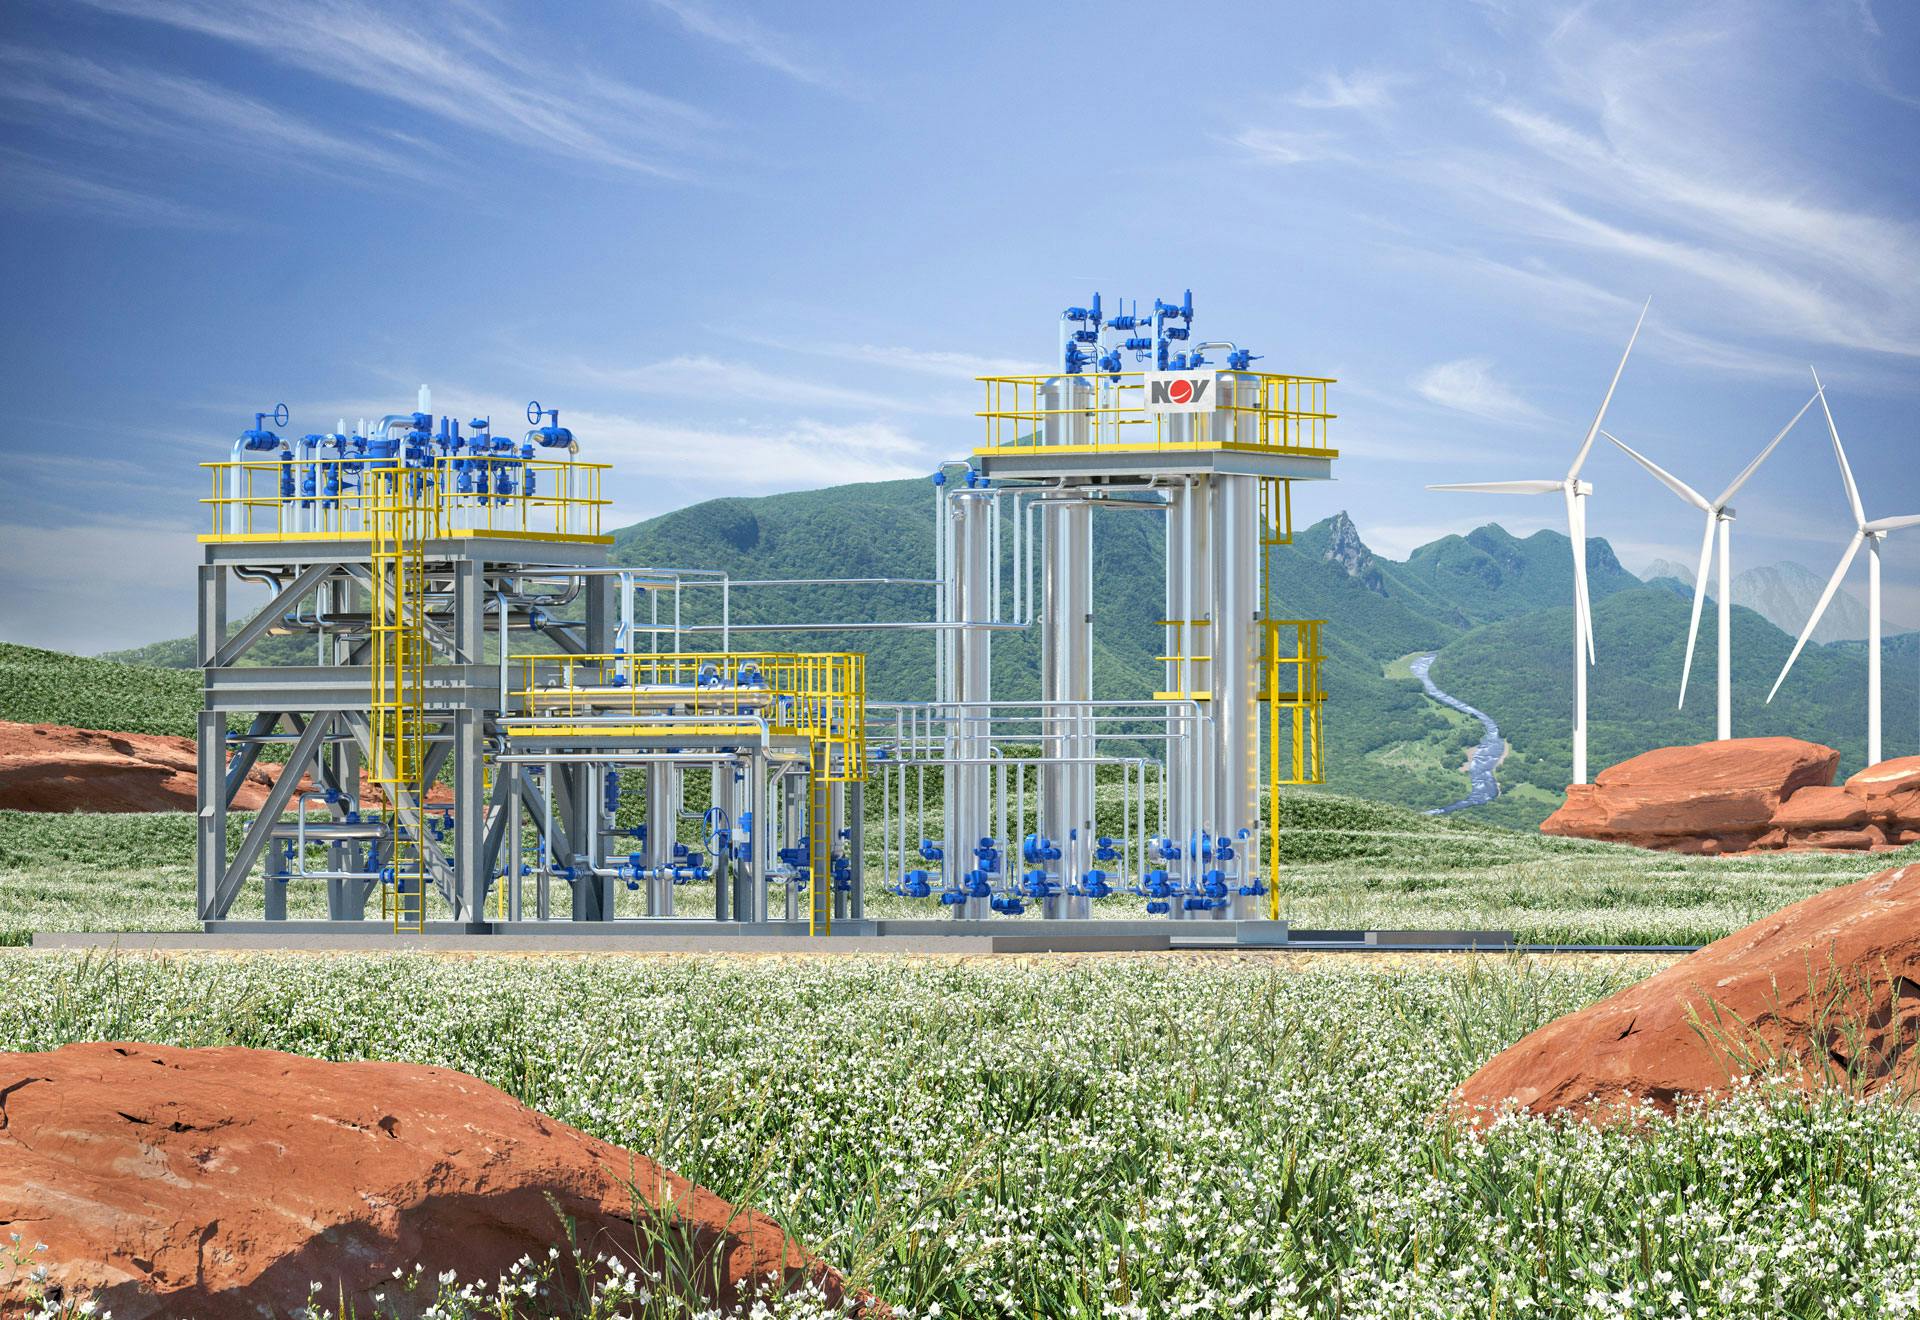 Render of a hydrogen purification plant, wth wind turbines and a mountain range in the background